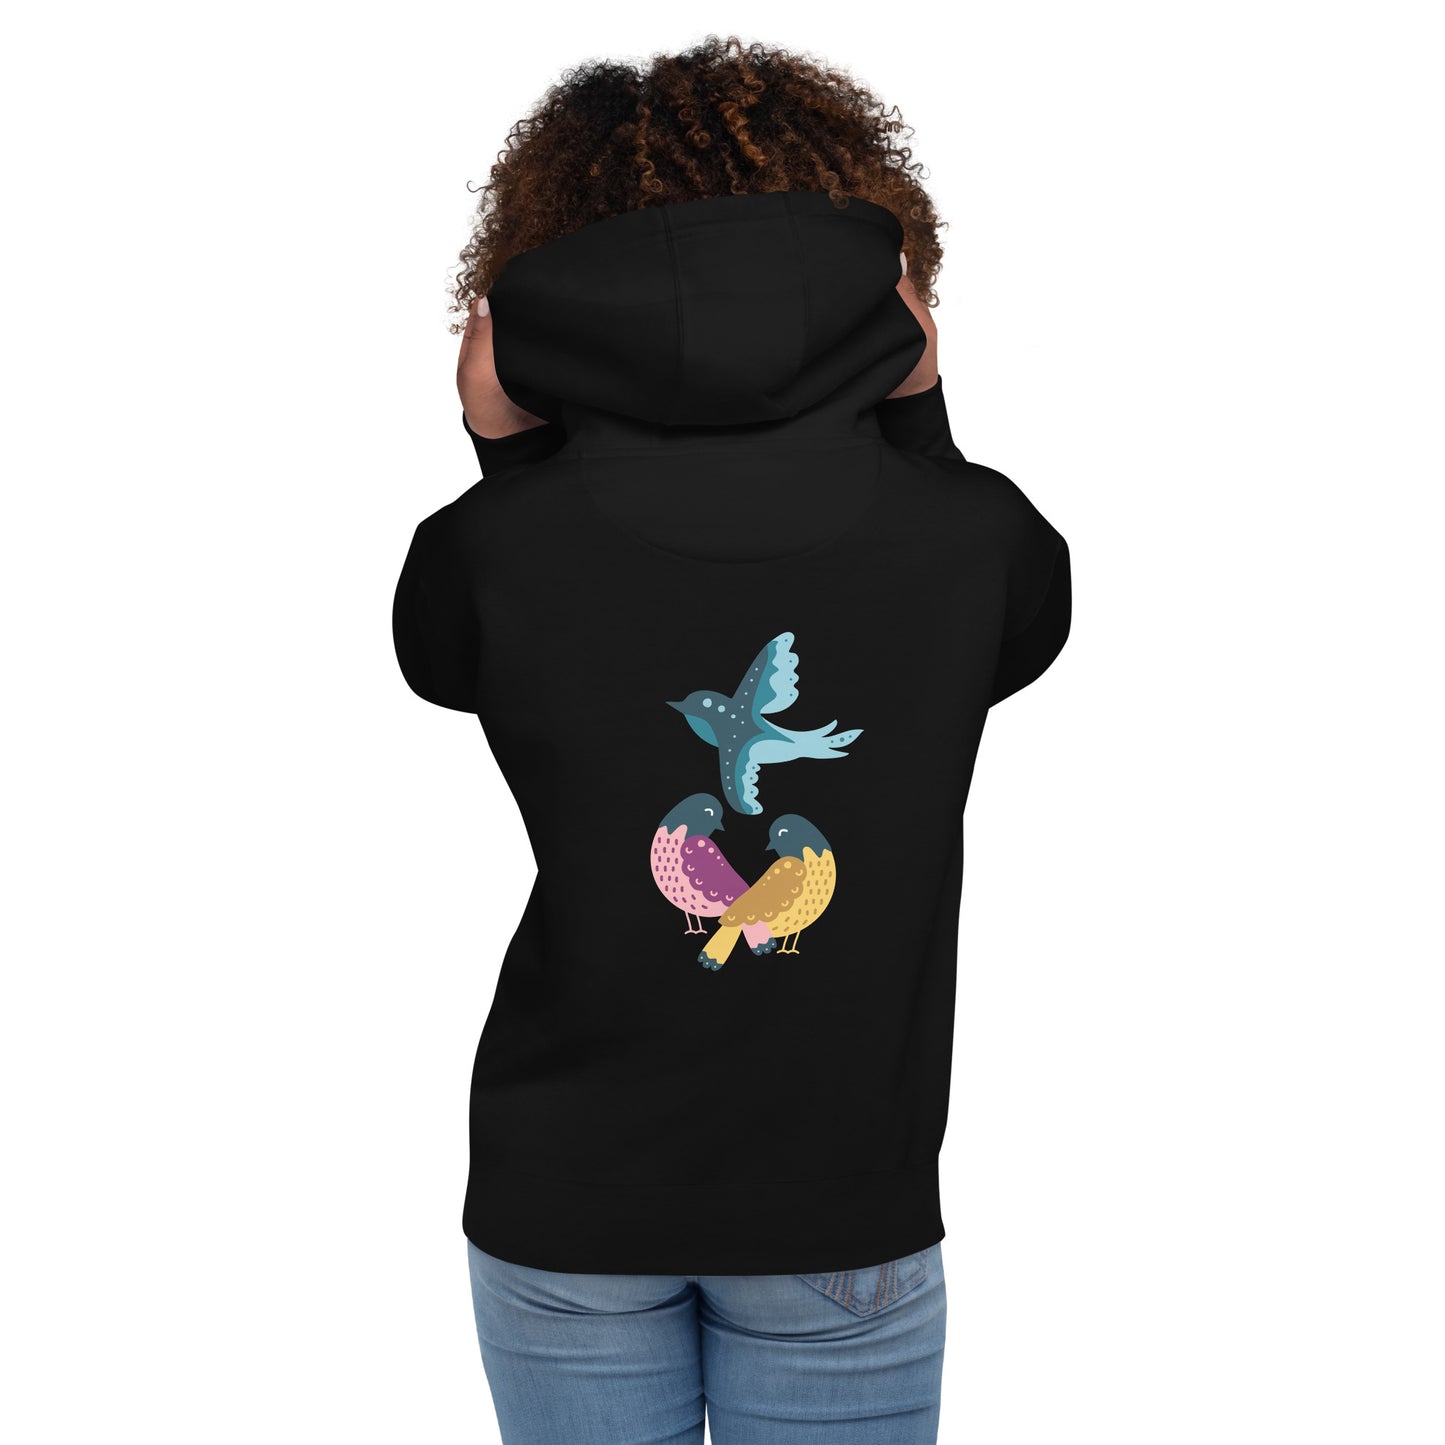 Everything's Gonna Be Alright Unisex Hoodie